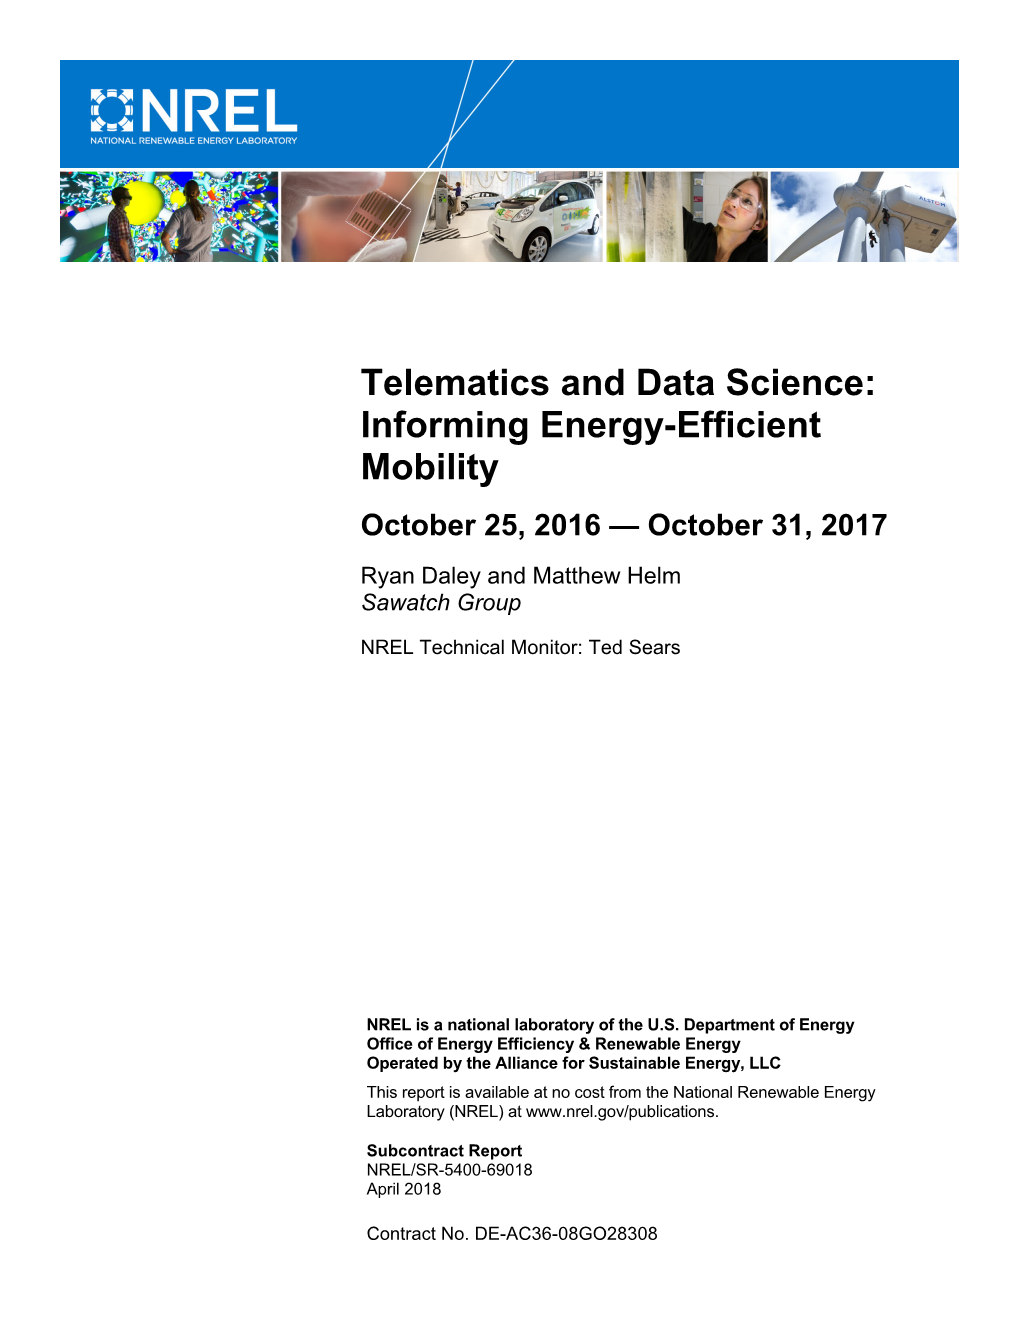 Telematics and Data Science: Informing Energy-Efficient Mobility October 25, 2016 — October 31, 2017 Ryan Daley and Matthew Helm Sawatch Group